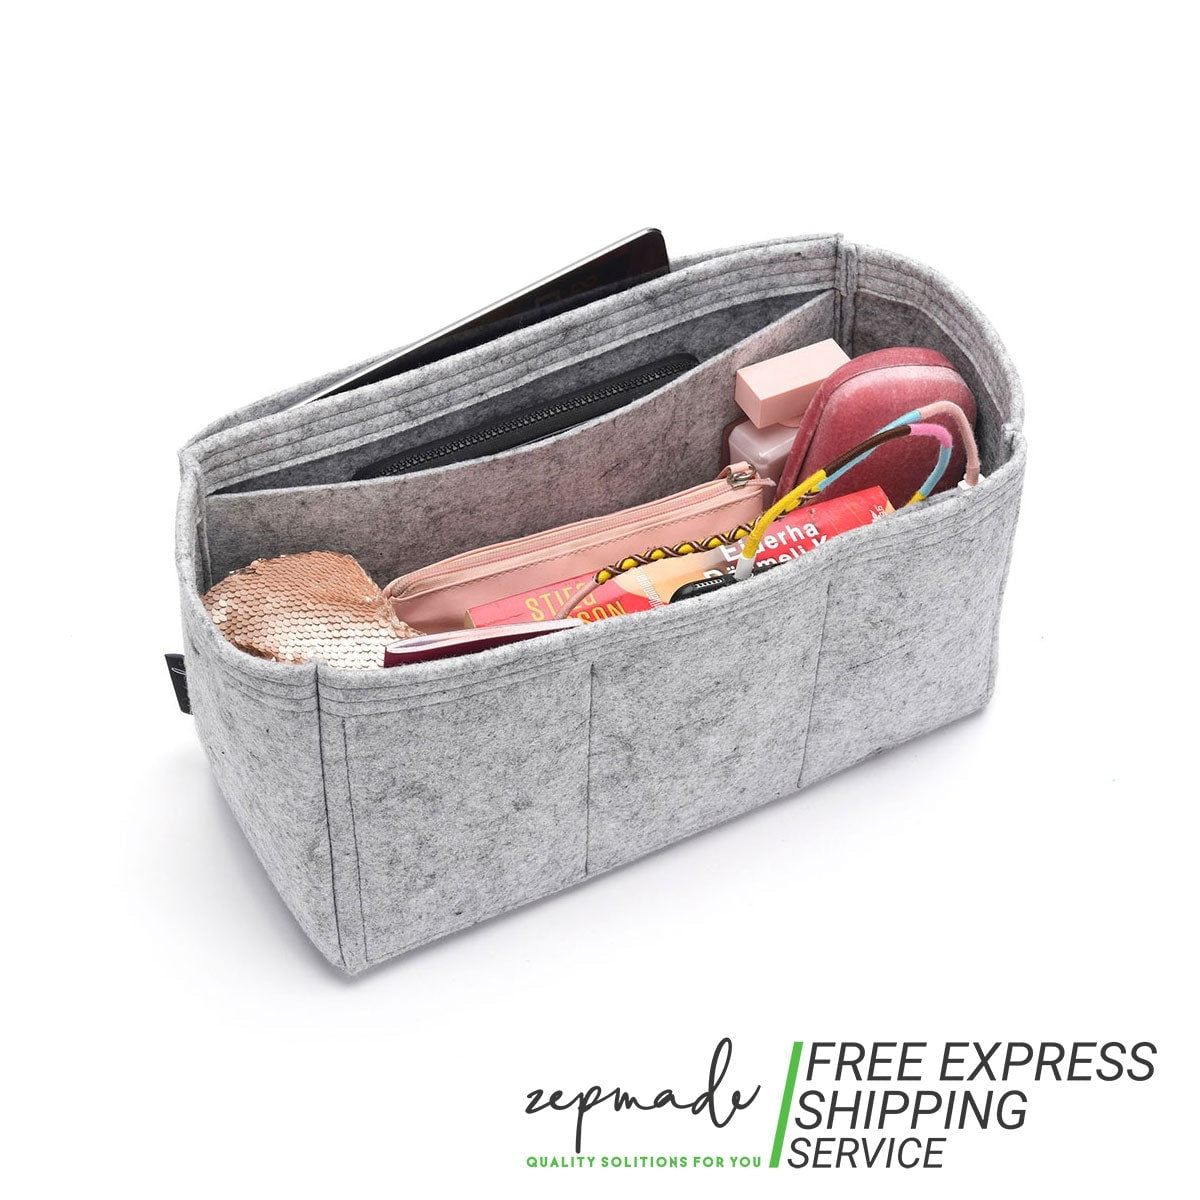 NOE Organizer] Felt Purse Insert with Middle Zip Pouch, Customized To